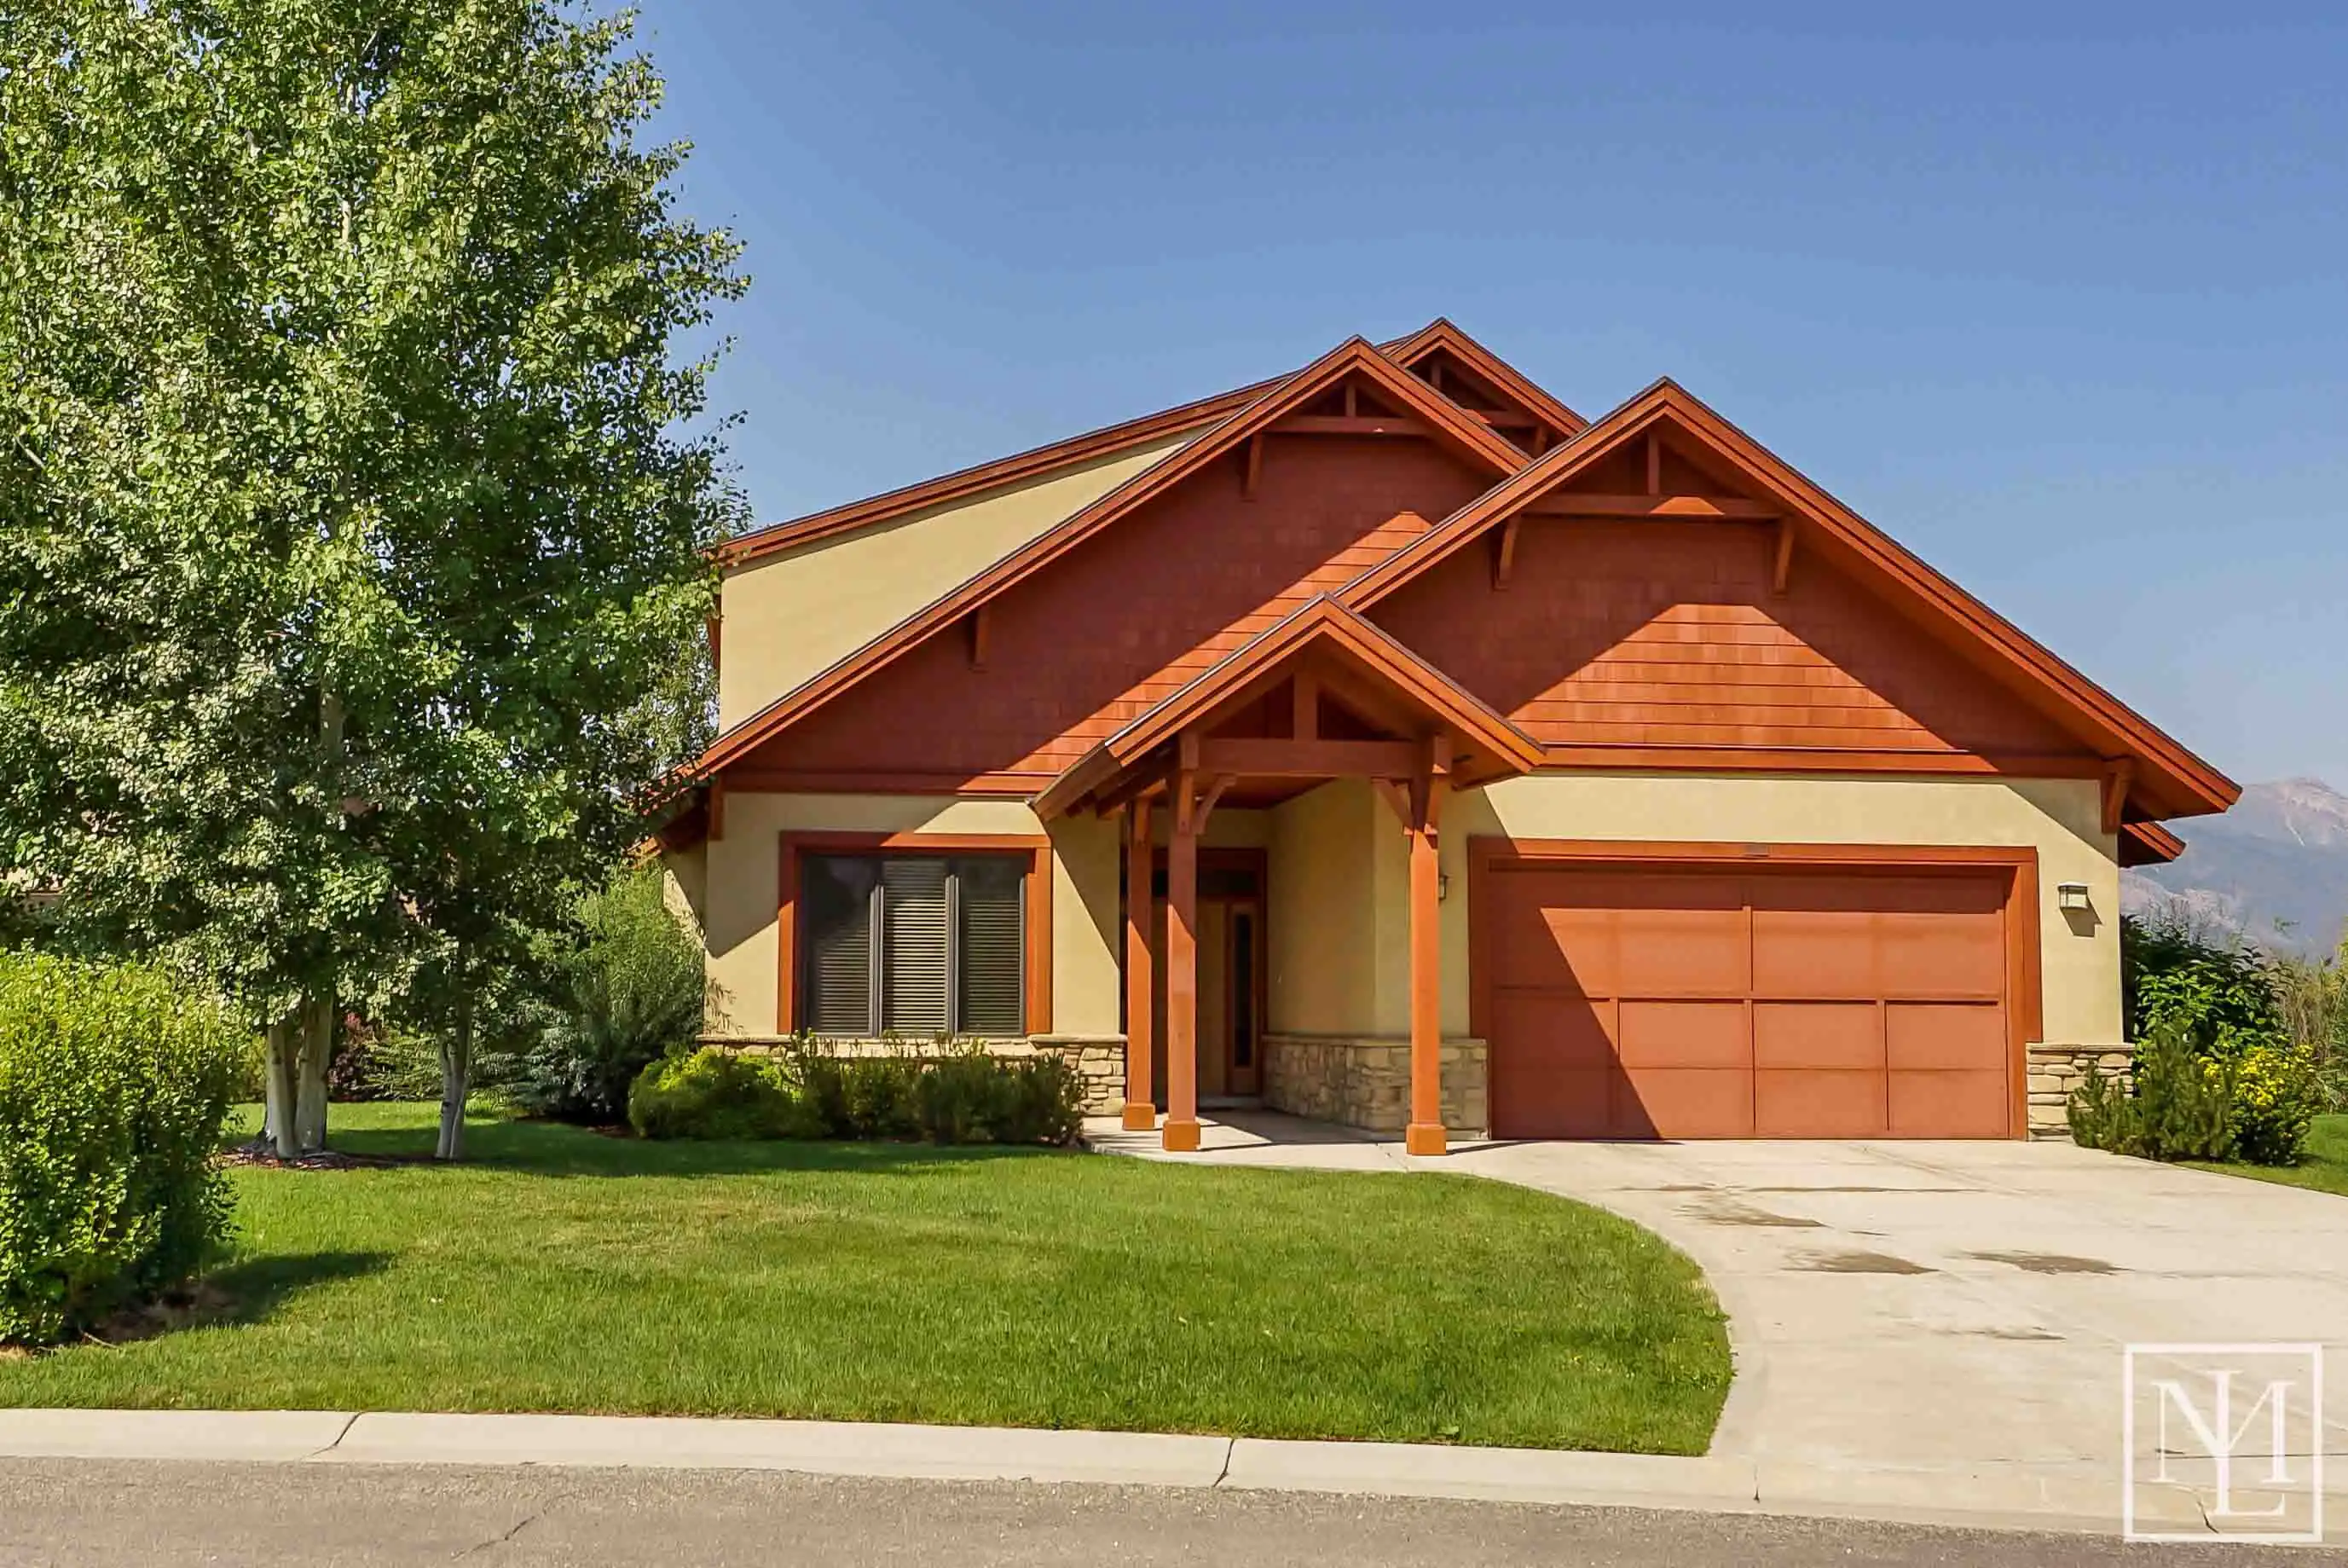 hero image for blog 3399 Cloud Peak Court Eden, UT - Fully Furnished, Move In Ready Home -SOLD